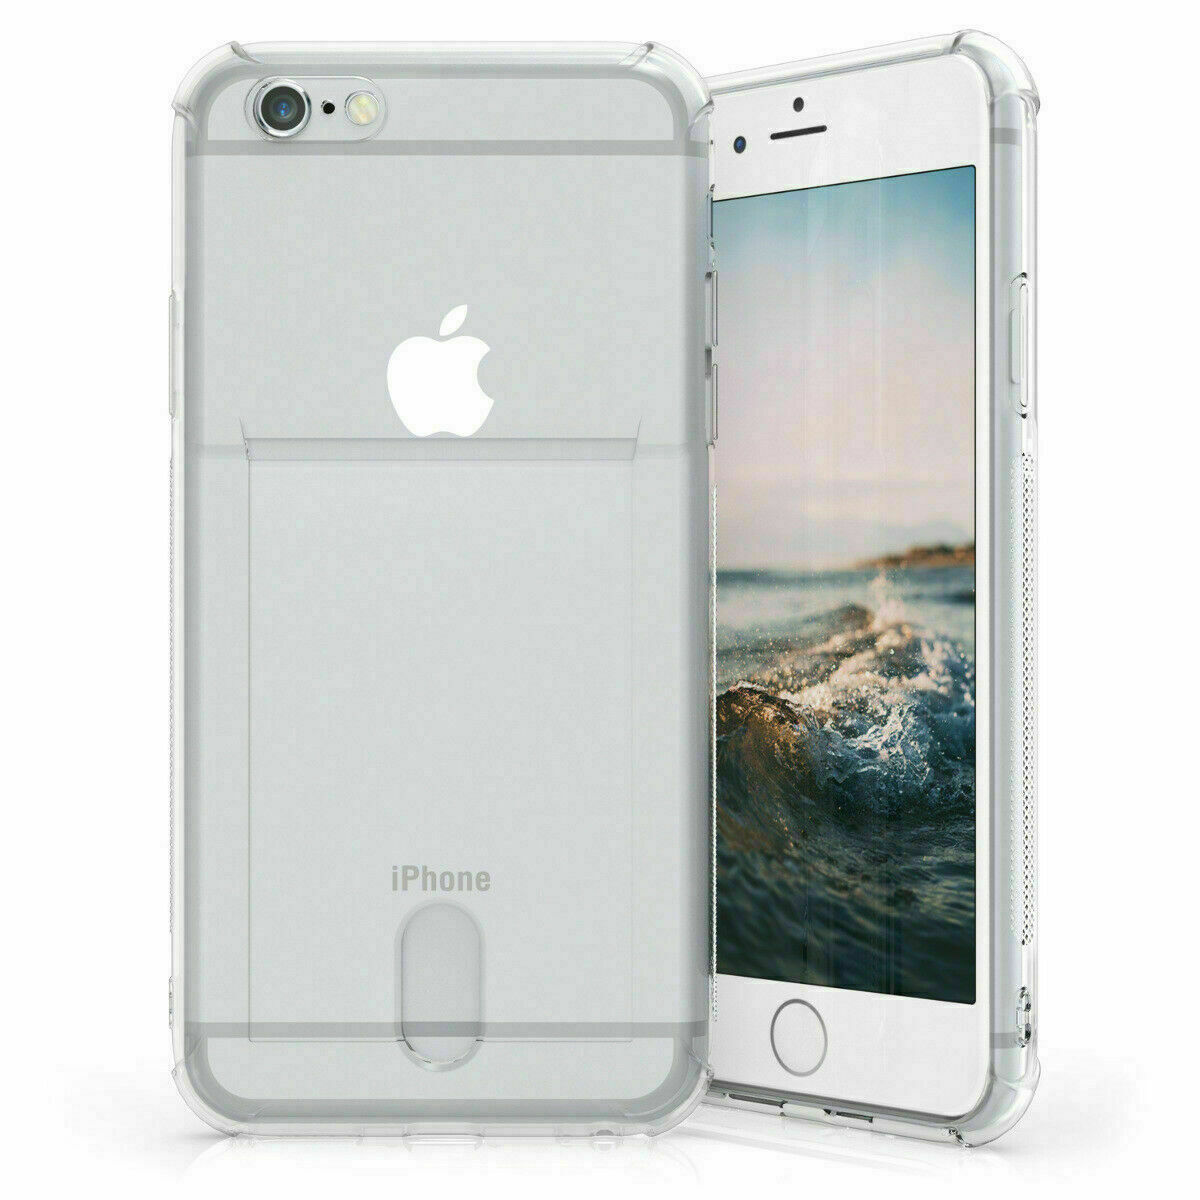 Clear Case For  iPhone 12 Mini 5.4” TPU Silicone with Card Slot